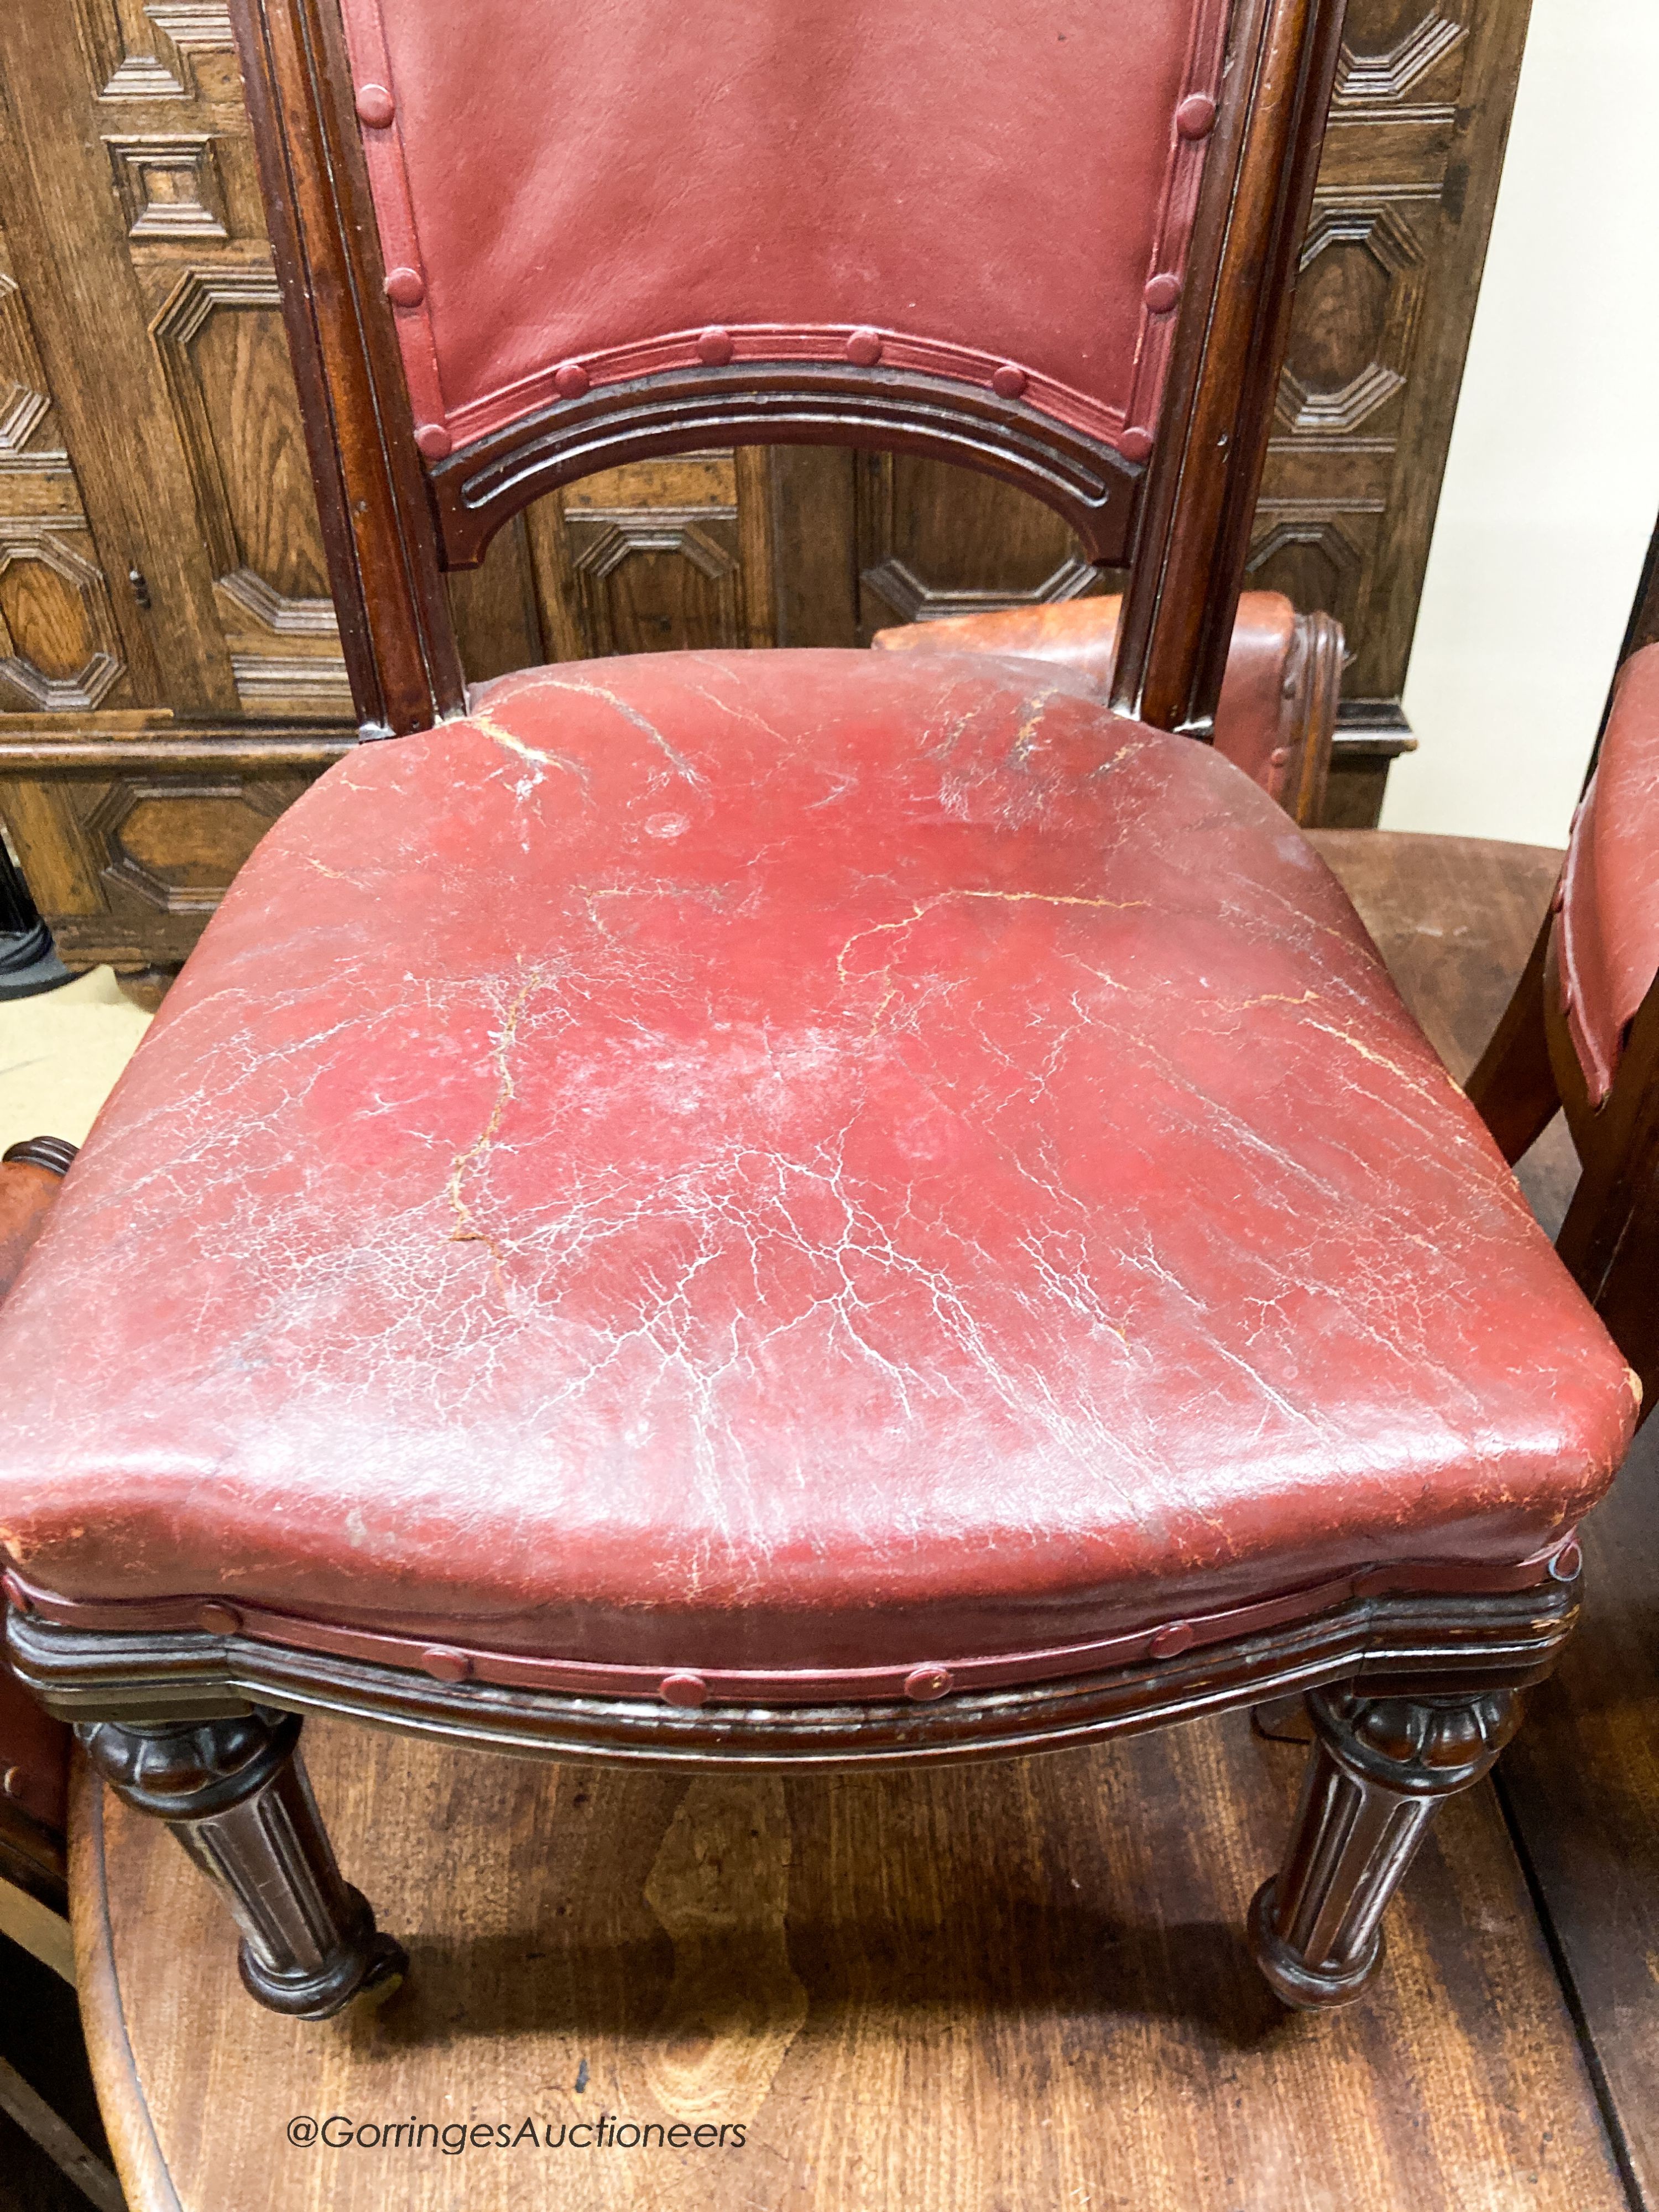 A set of six Victorian leather and mahogany dining chairs